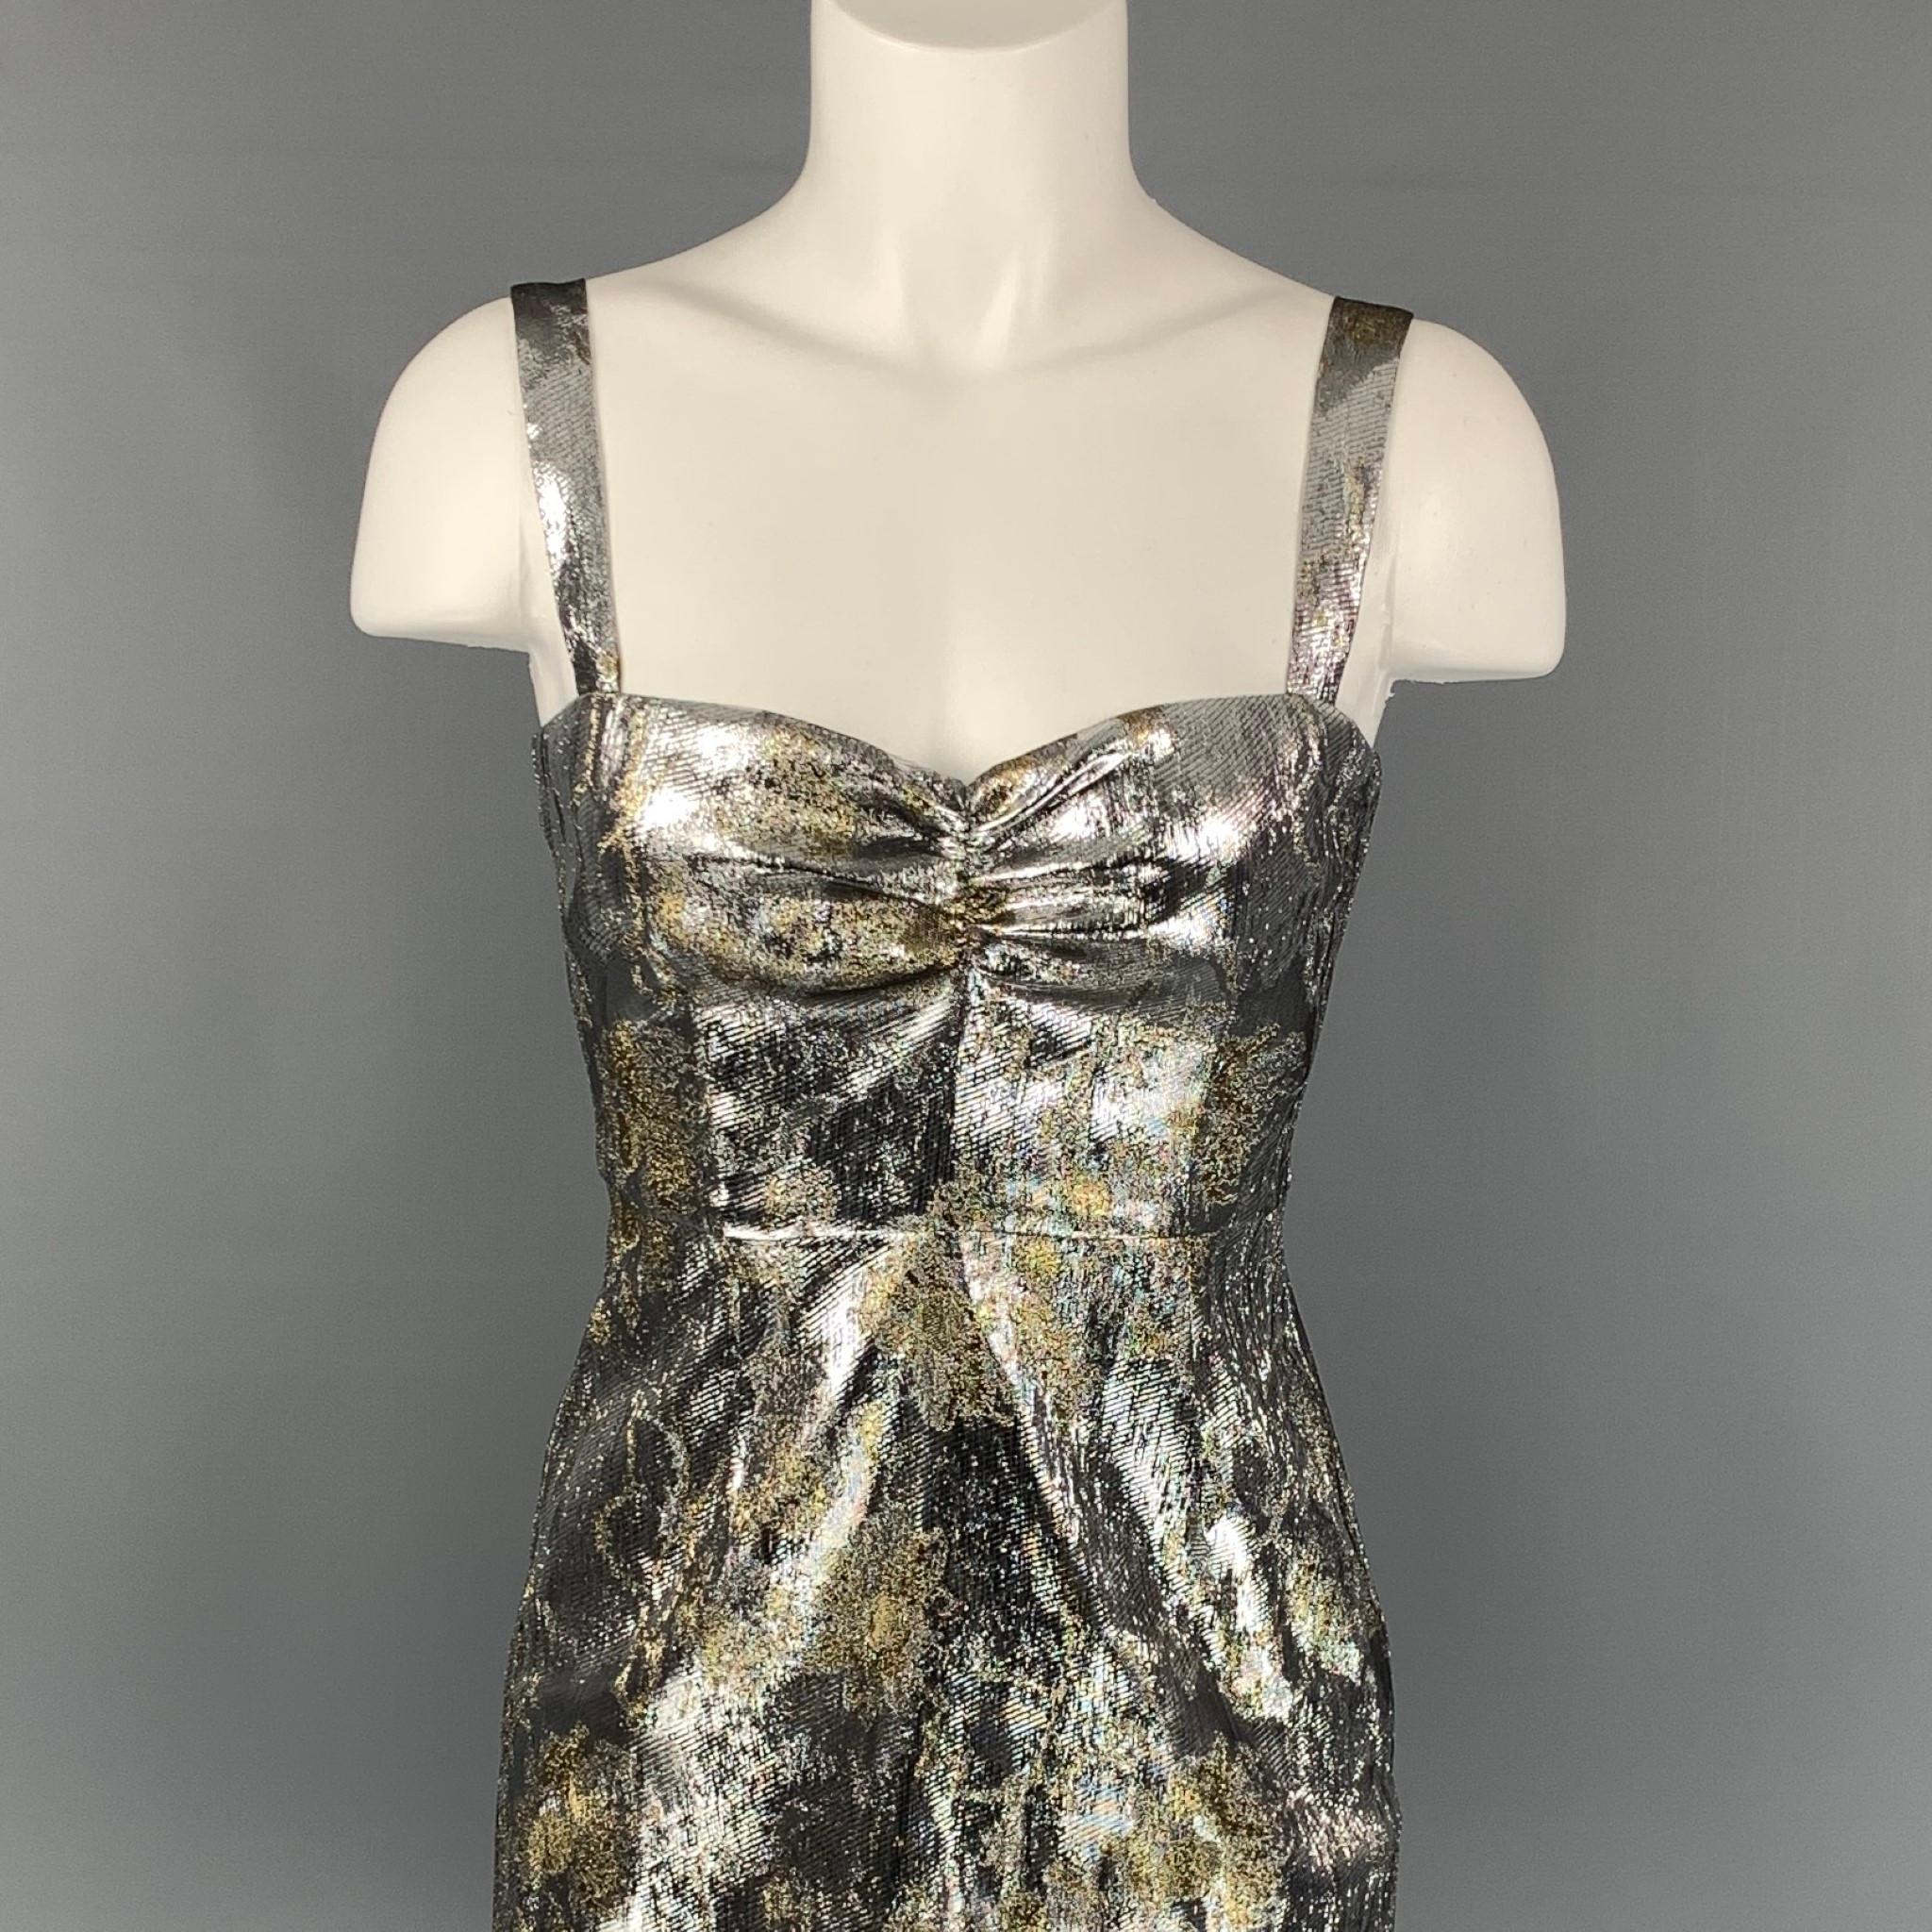 CYNTHIA ROWLEY mini dress comes in silver & gold brocade polyester / lurex featuring a sweetheart neckline, ruffled trim, shoulder straps, and a back zipper closure.

New With Tags. 
Marked: 4

Measurements:

Bust: 29 in.
Waist: 26 in.
Hip: 36